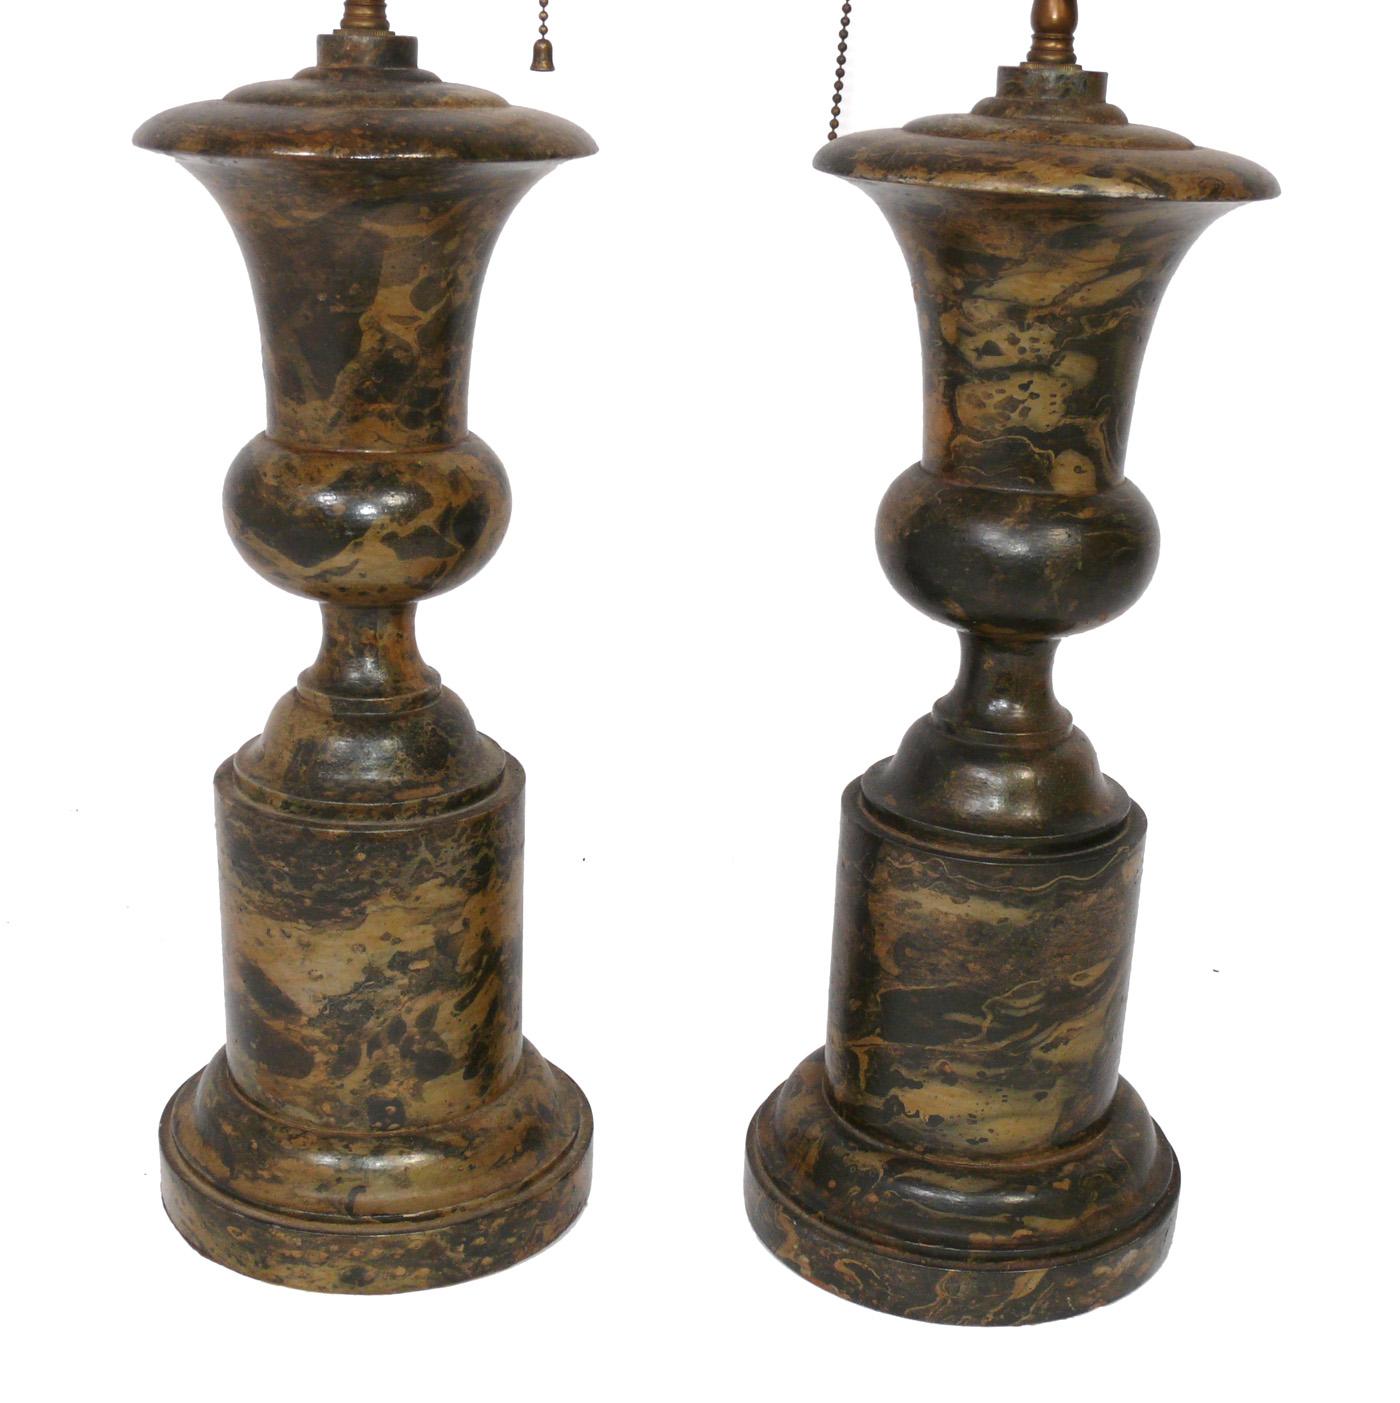 Faux marble hand painted wood urn lamps, American, circa 1940s. They have been rewired and are ready to use. The price and measurements noted include the shades.